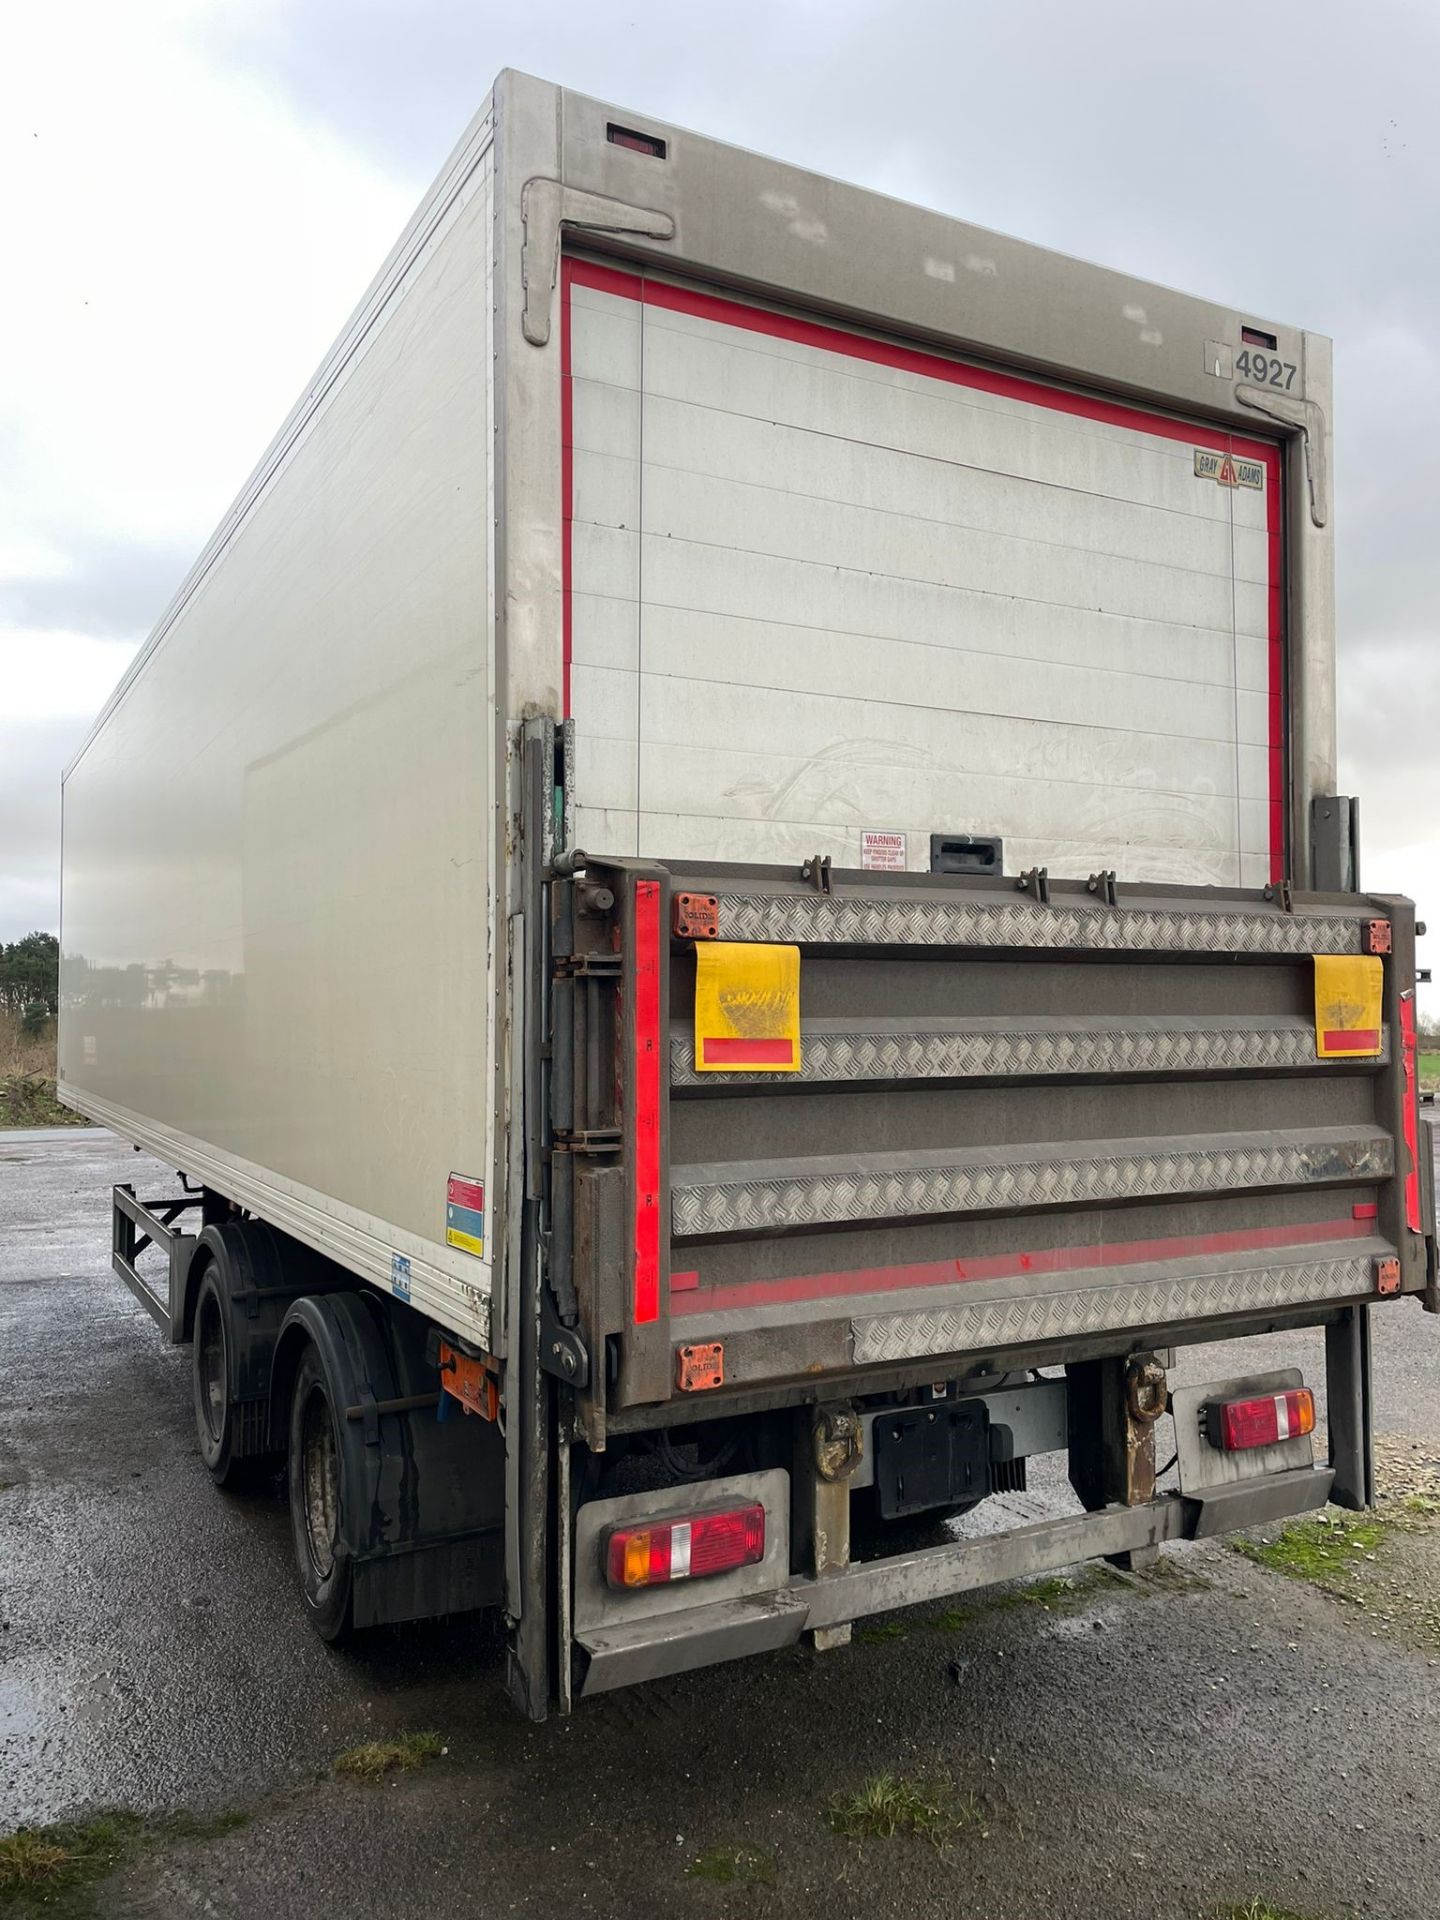 Trailer 4927 - 2013 G&A 10.4m Tandem Refrigerated Multi-Temp Trailer - Image 9 of 14